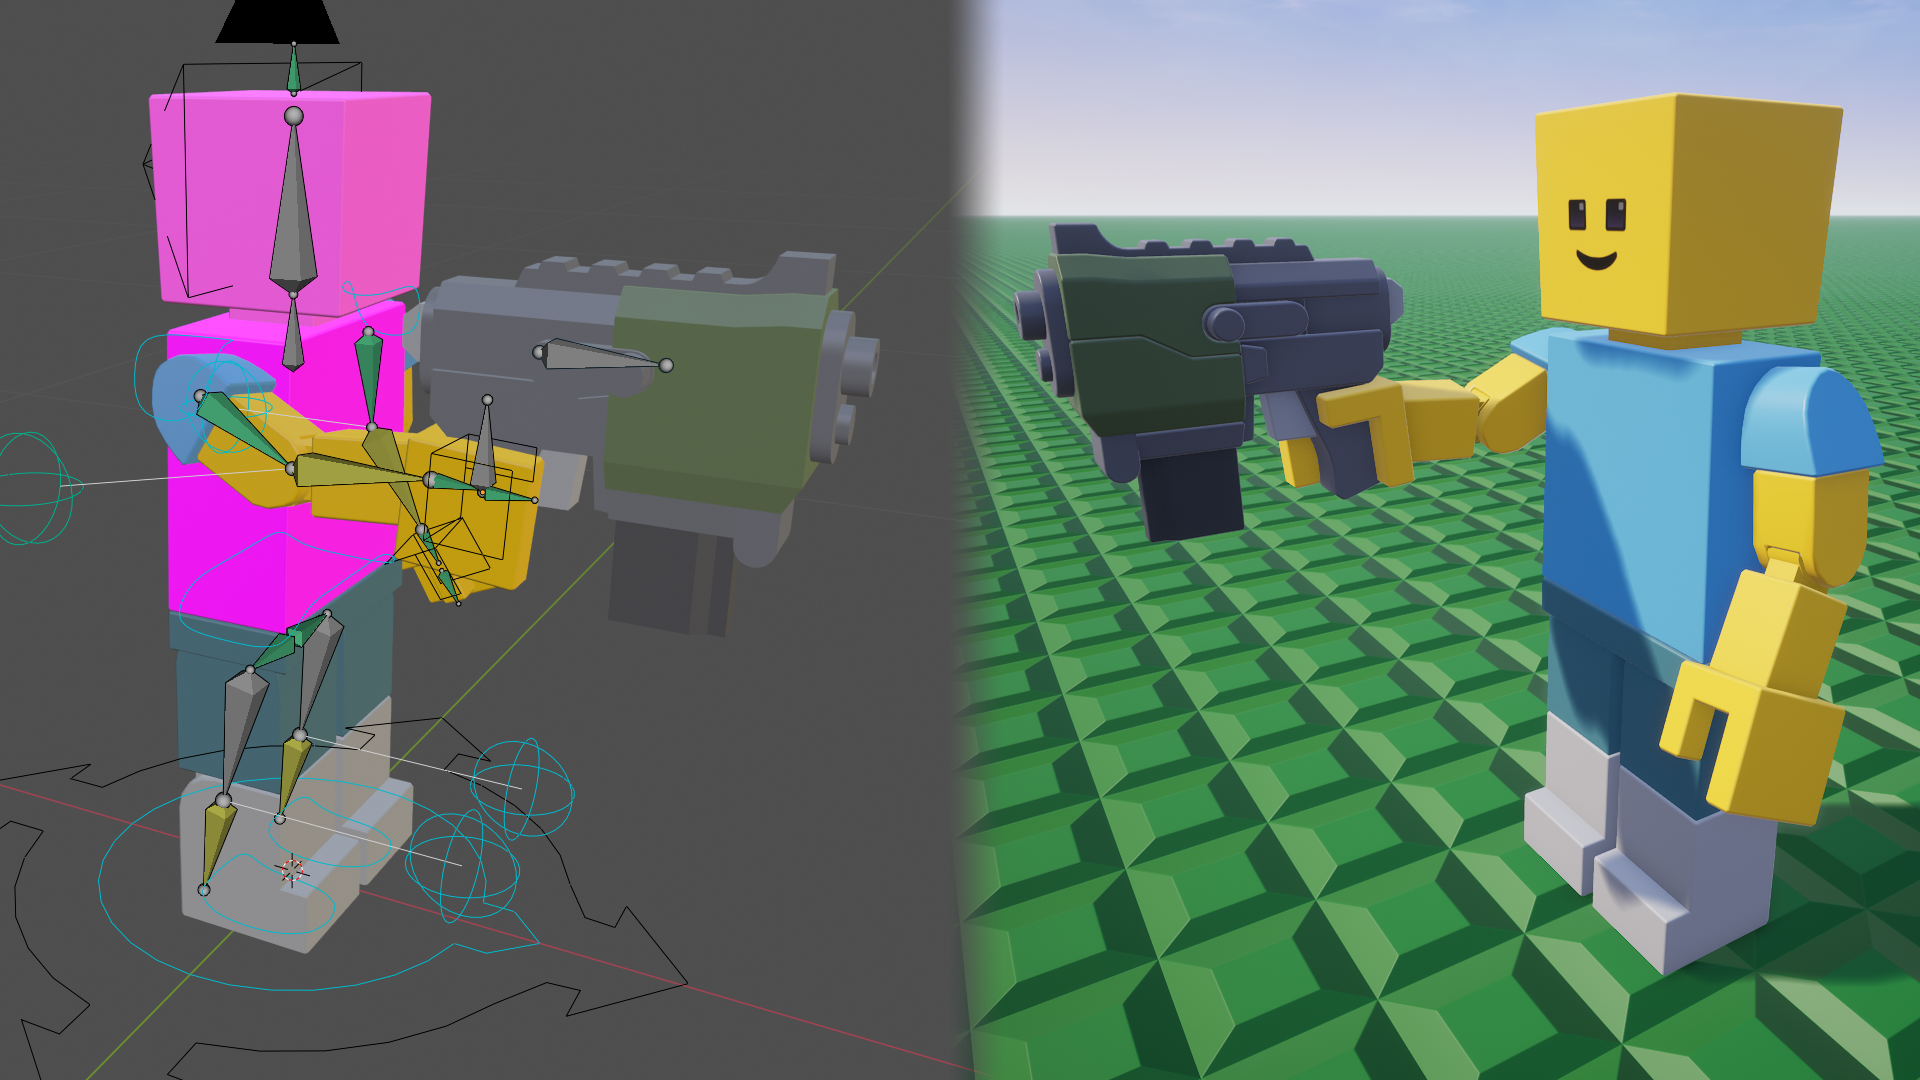 Developing Weapons for Brickadia, Part 2